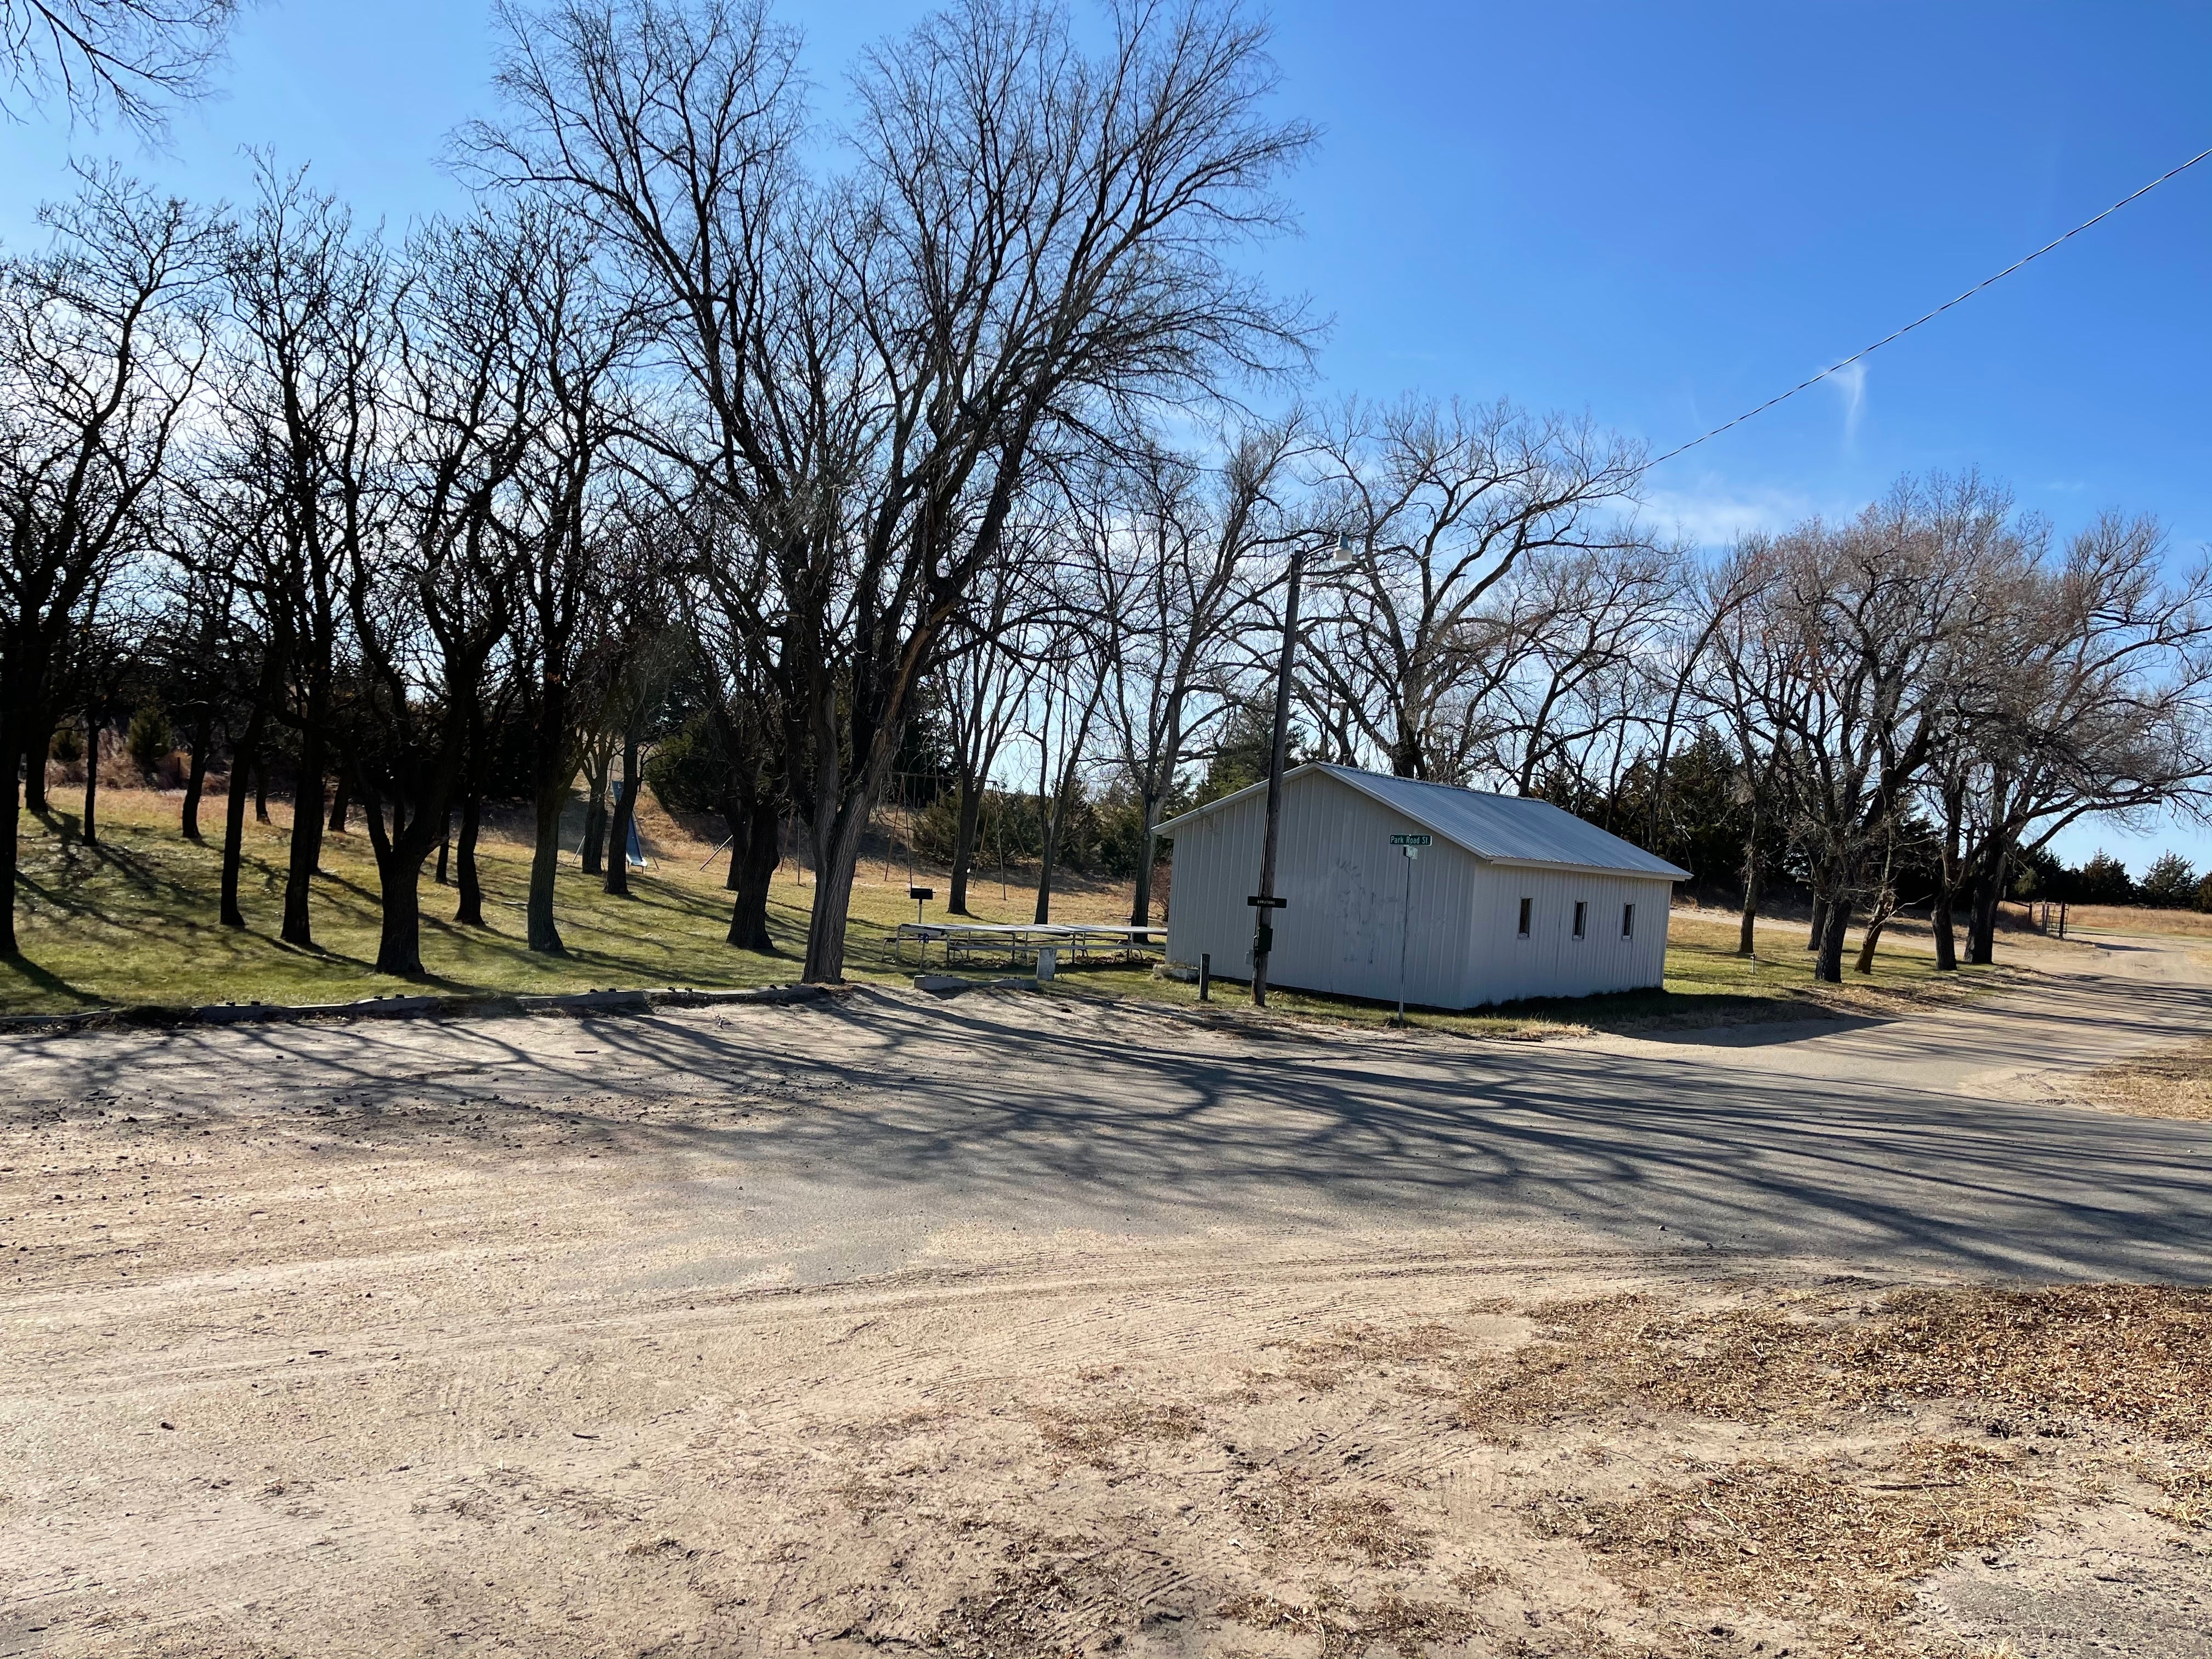 Camper submitted image from Thedford City Park - 5